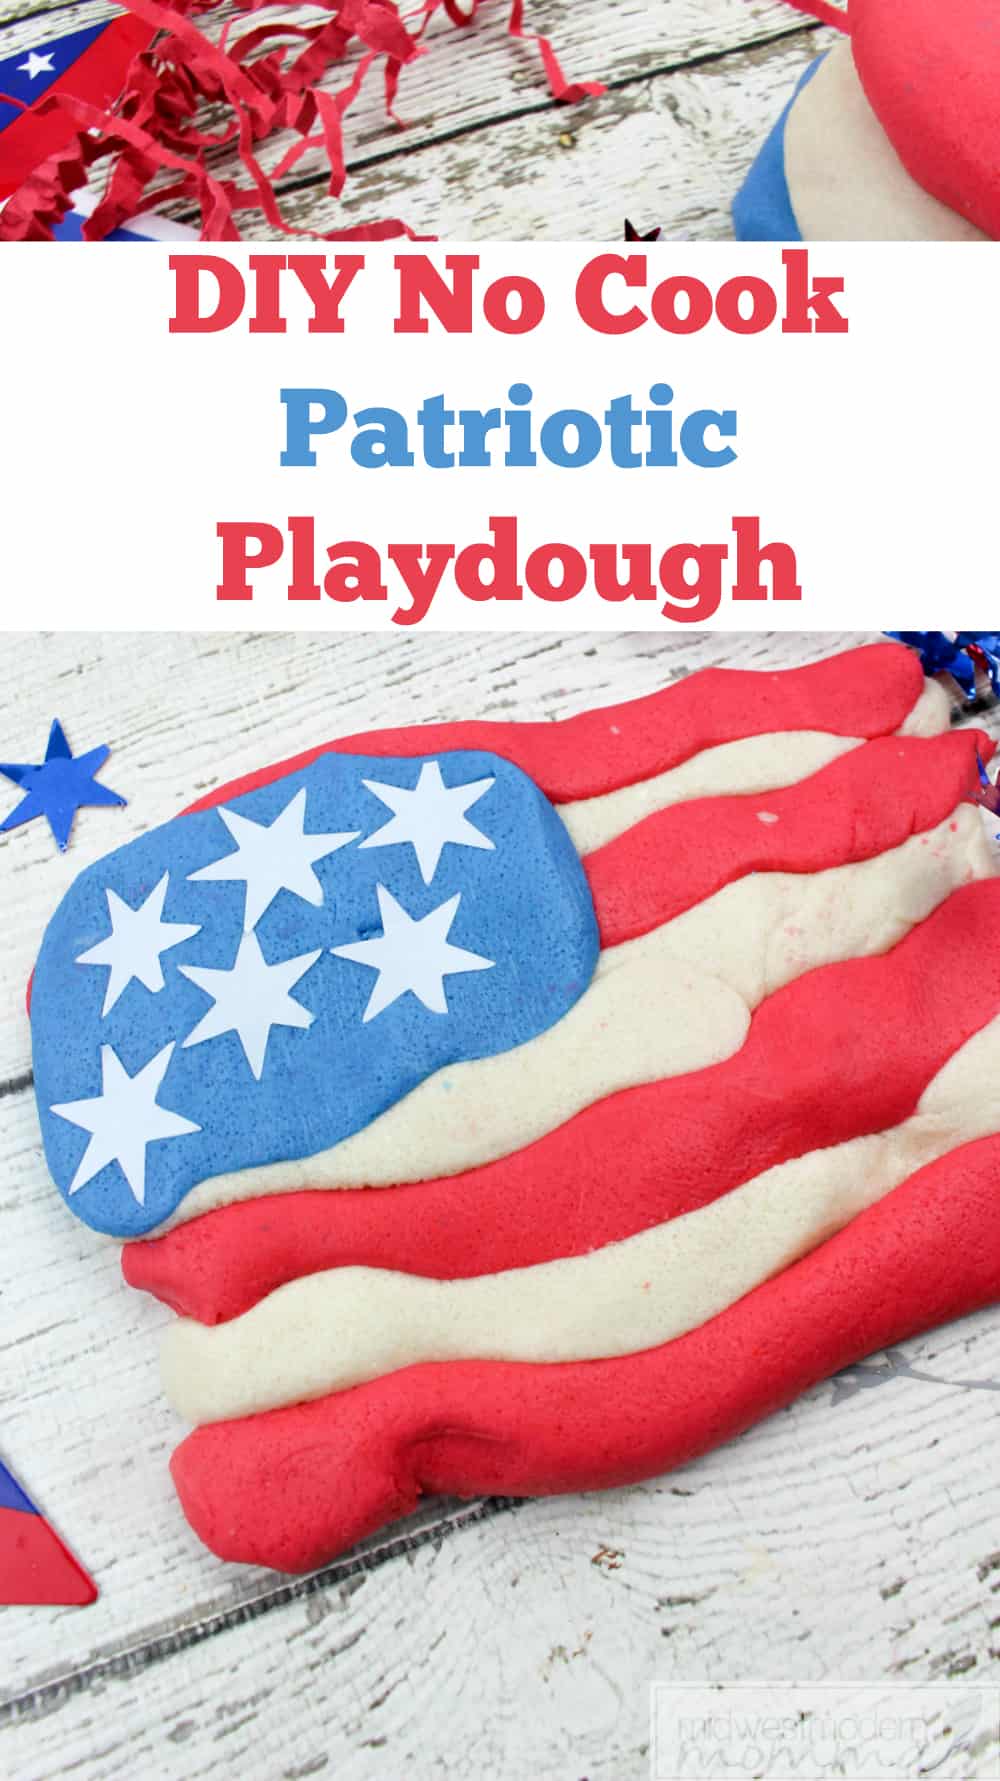 Patriotic Homemade Playdough is a great fun No Cook Play Dough Recipe that you and your kids will love as a fun summer kids craft!